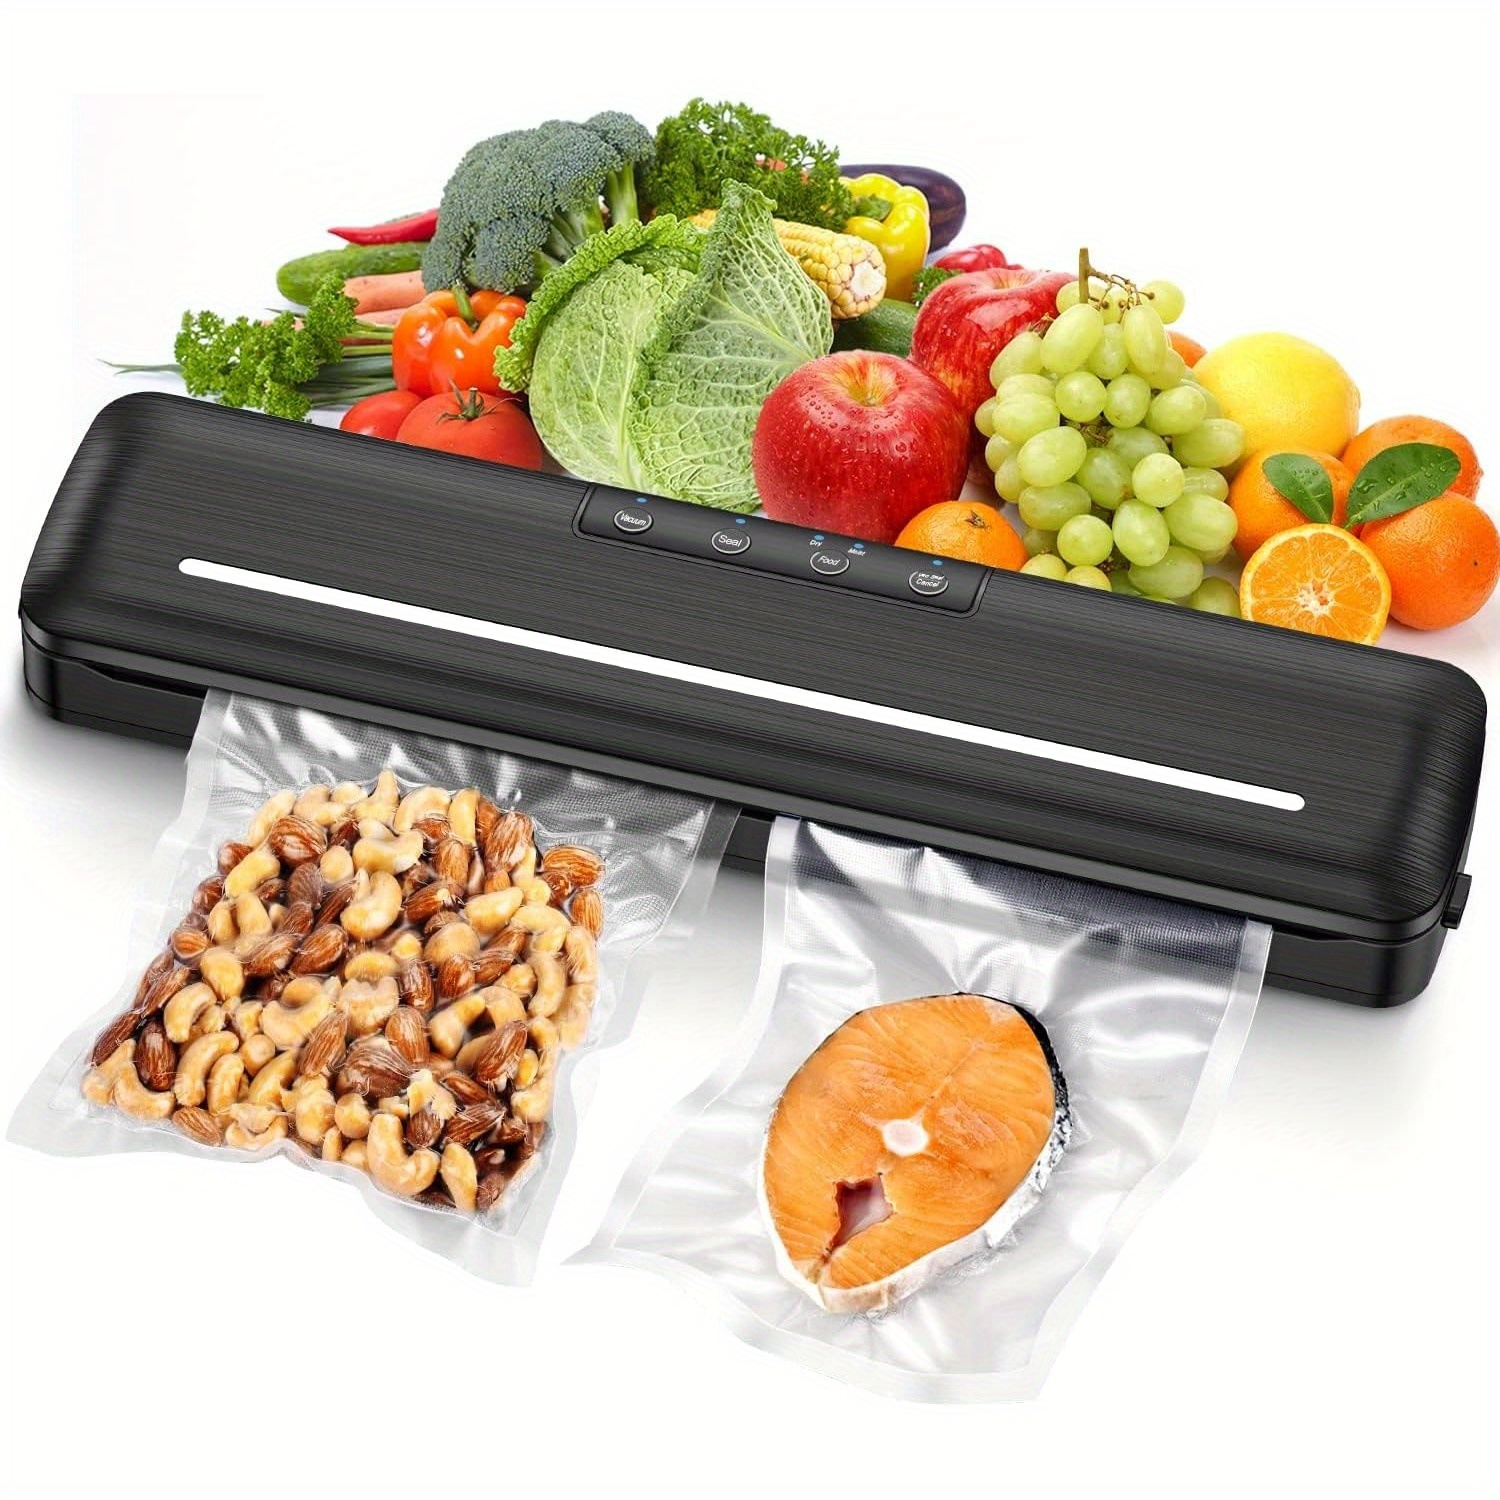 

Vacuum Sealer Automatic Air Sealing Food Vacuum Sealer Machine With Dry/moist Food Modes And Cutting Design With 10pcs 11.8 Inch Sealer Bags For Food